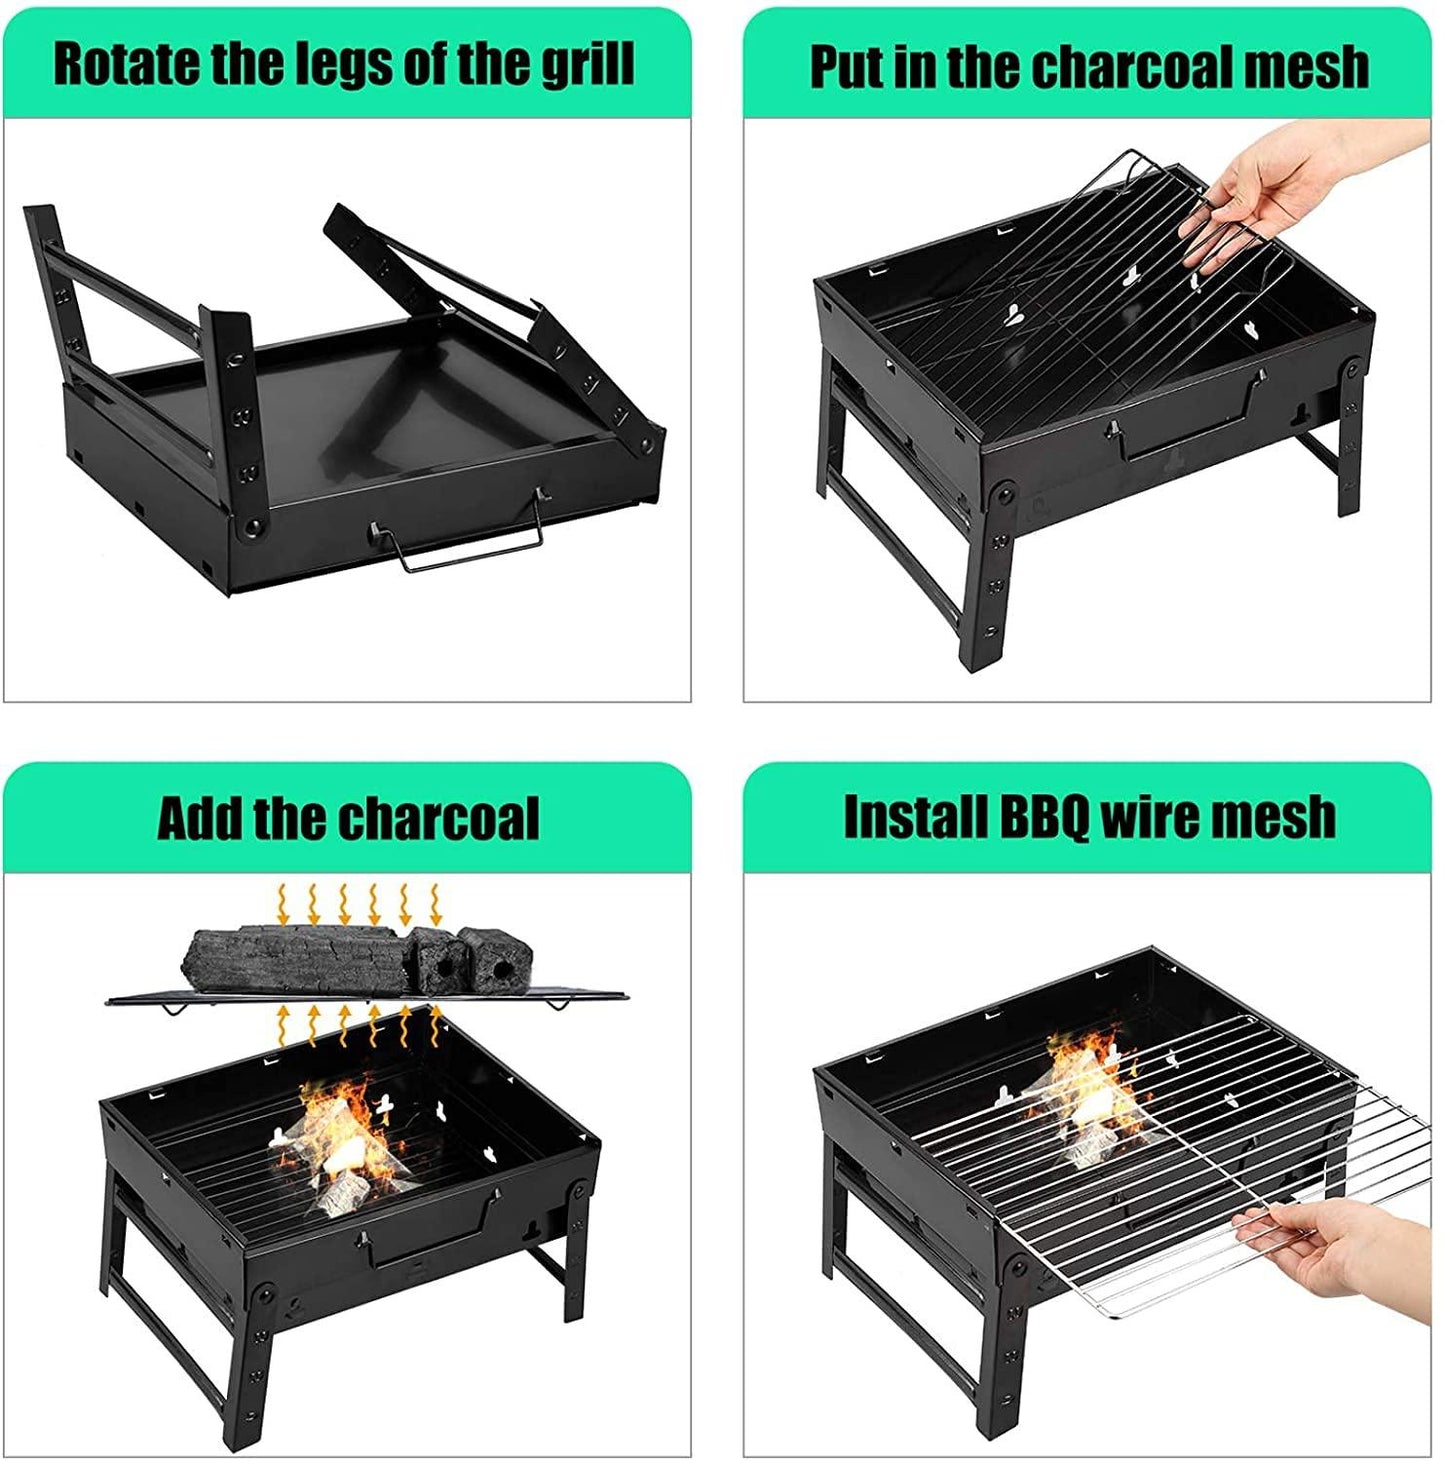 Folding Portable Barbecue Charcoal Grill, Barbecue Desk Tabletop Outdoor Stainless Steel Smoker BBQ for Outdoor Cooking Camping Picnics Beach (M1) - CookCave